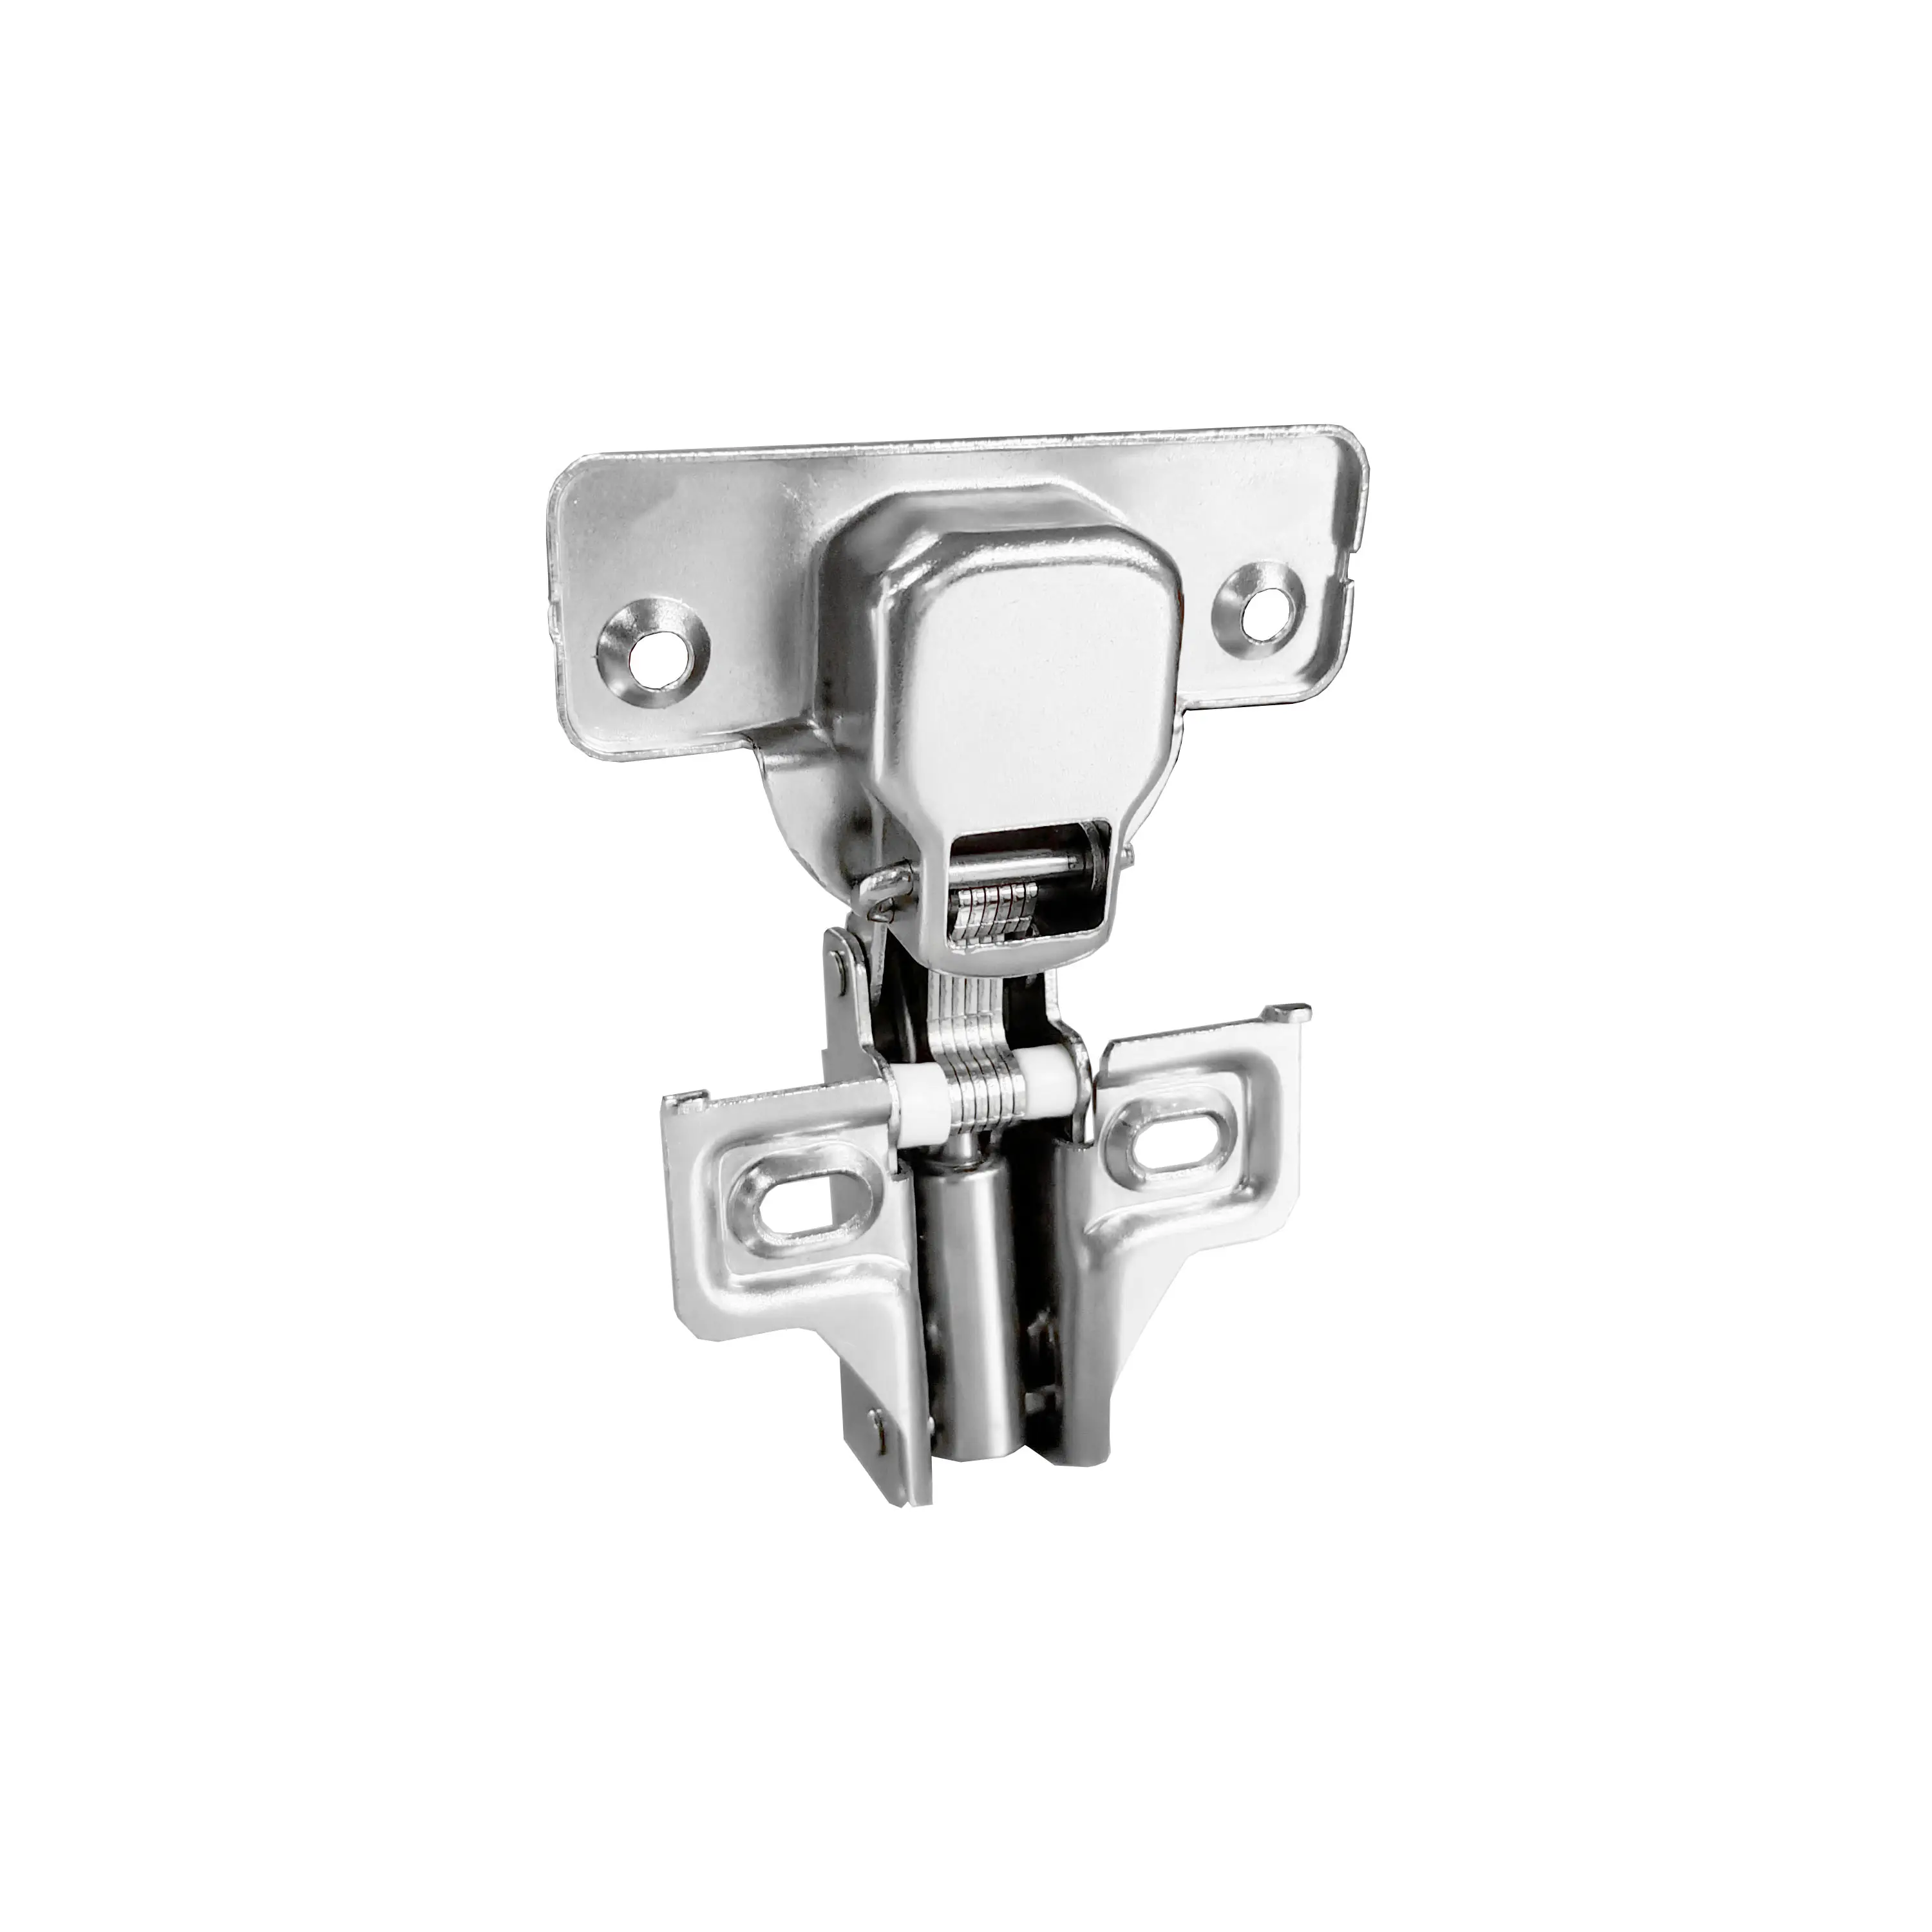 Short Arm Soft Close Hydraulic Face Frame Office Cabinet Concealed Hinge